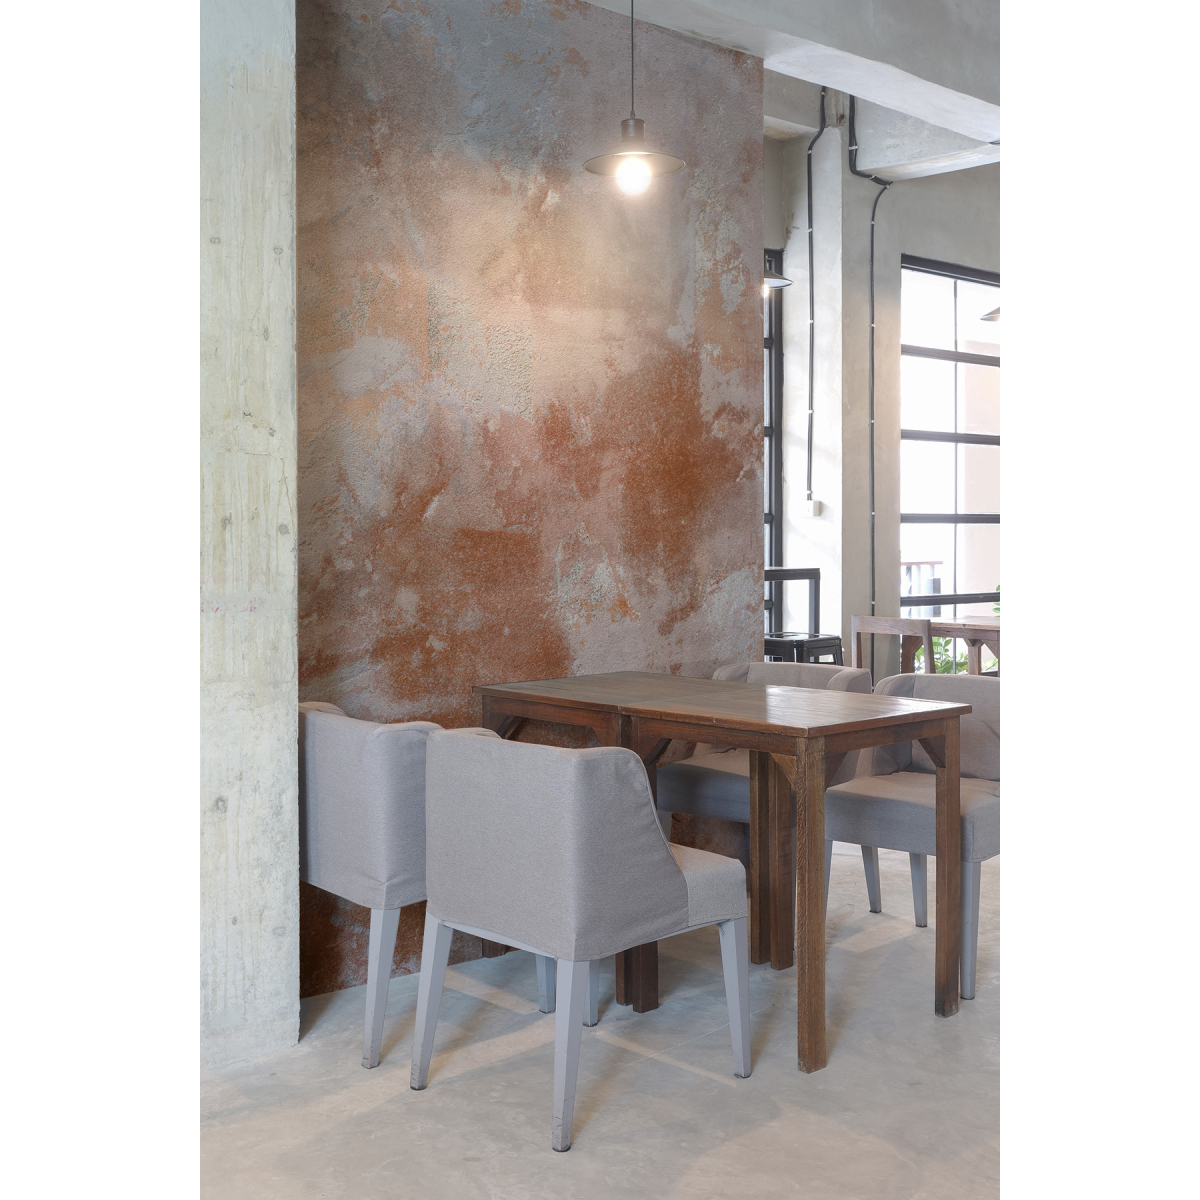 Panoramic wallpaper Roma - Collection Acte-Deco